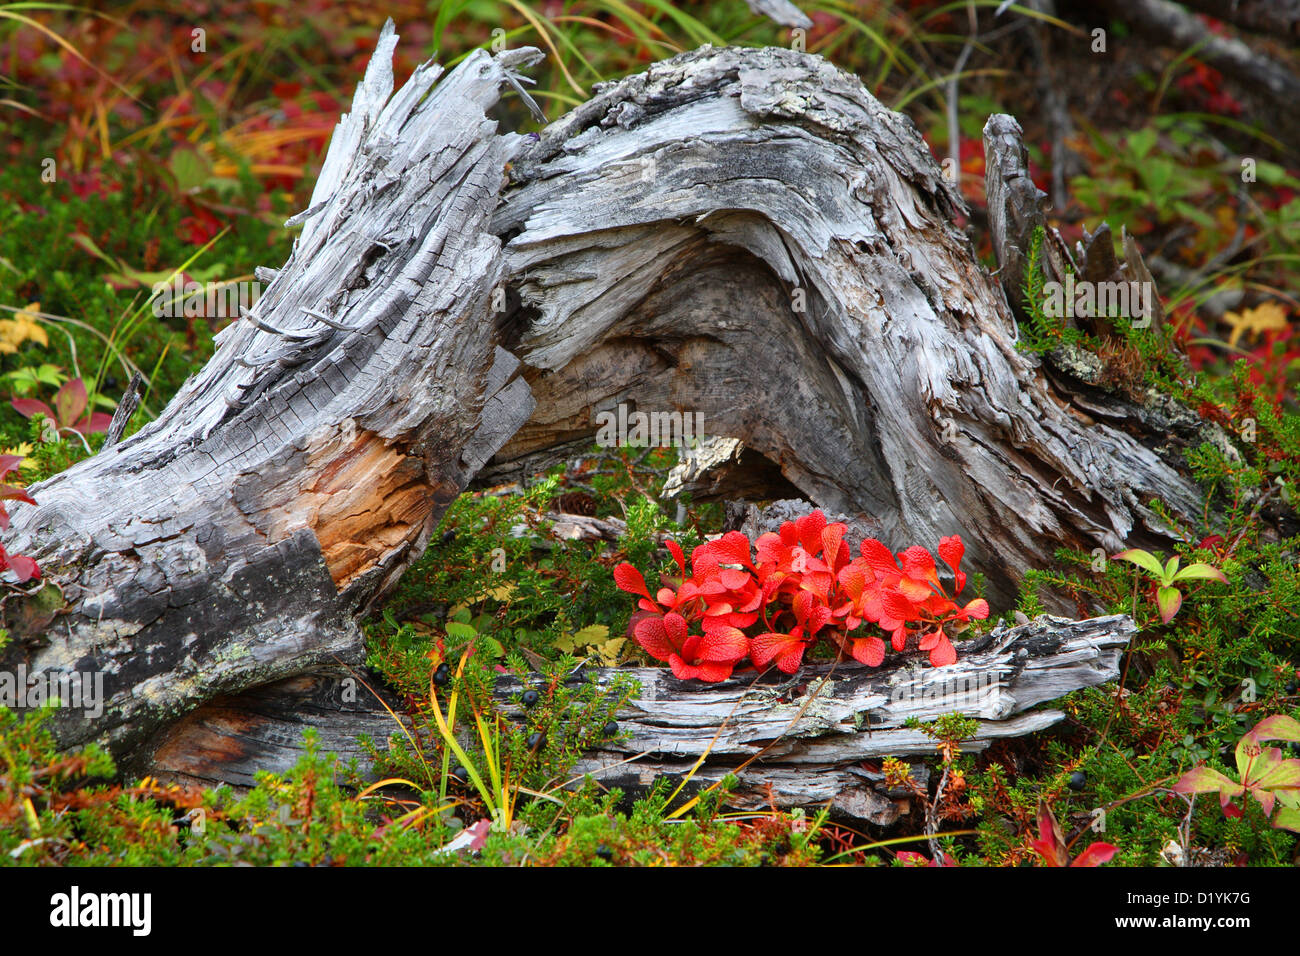 Alpine Bearberry, Mountain Bearberry, Black Bearberry (Arctosaphylos alpina), plants in autumn colours in front of a decaying tr Stock Photo